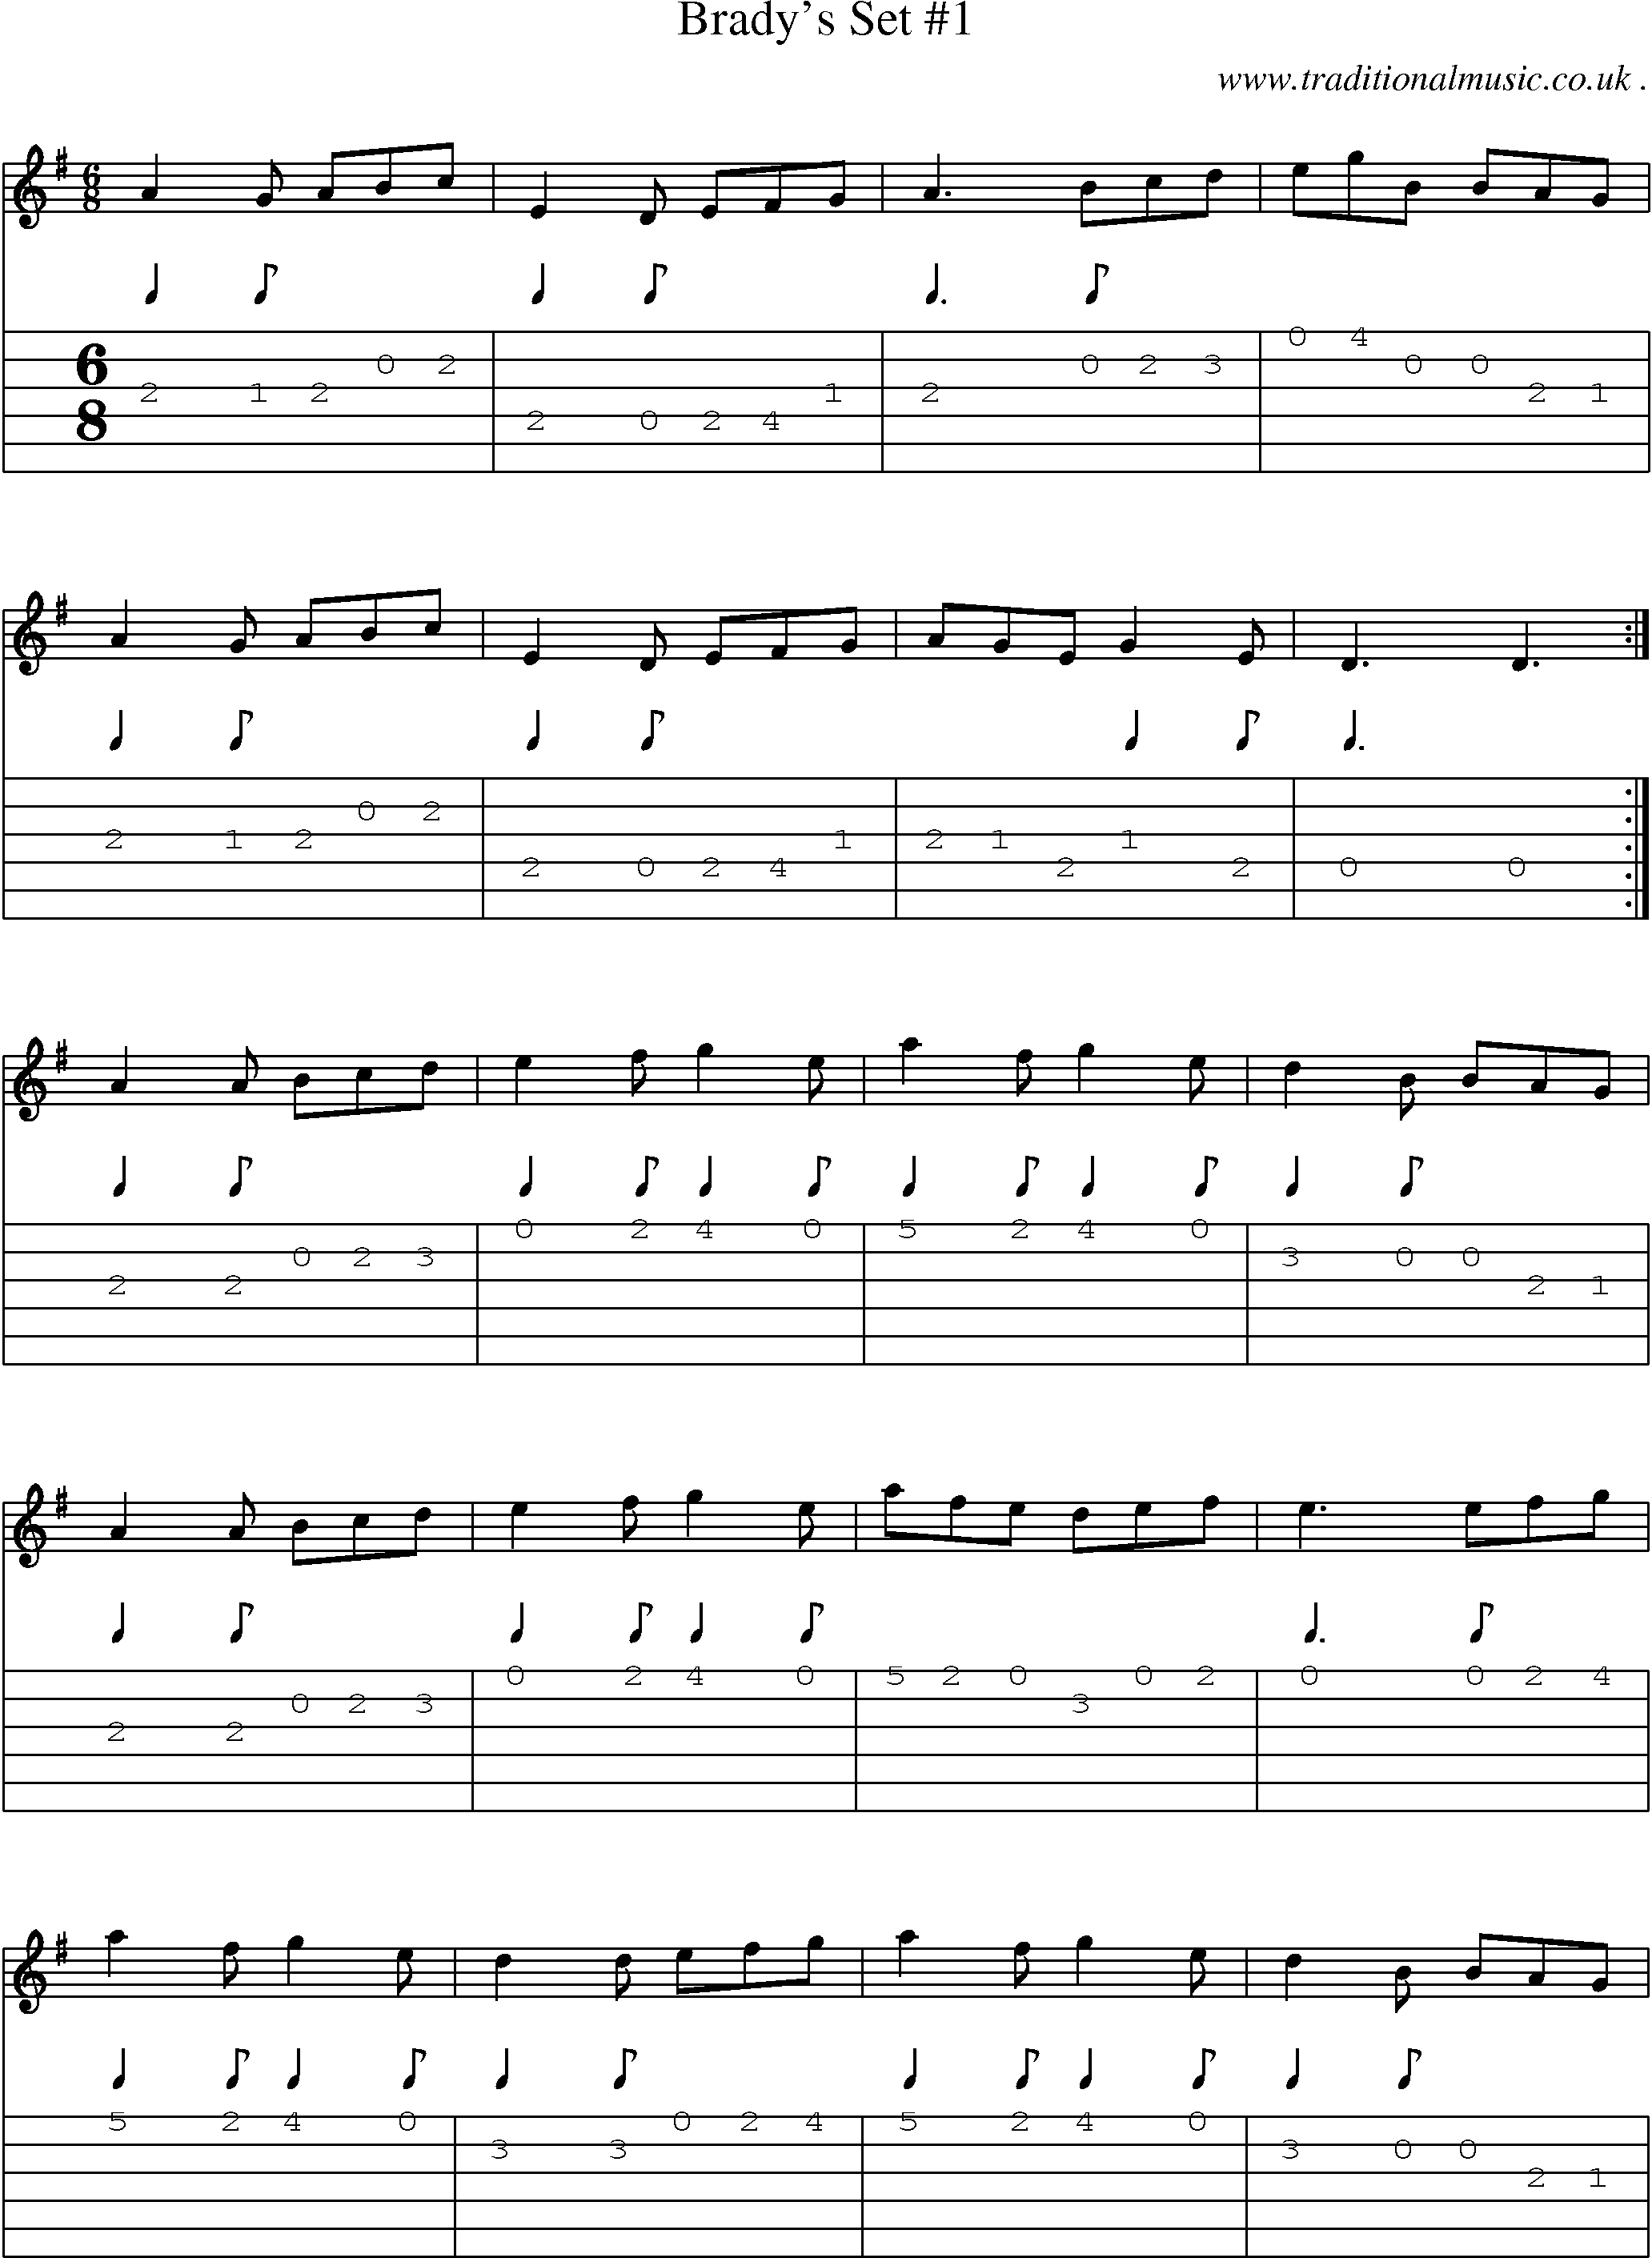 Sheet-Music and Guitar Tabs for Bradys Set 1